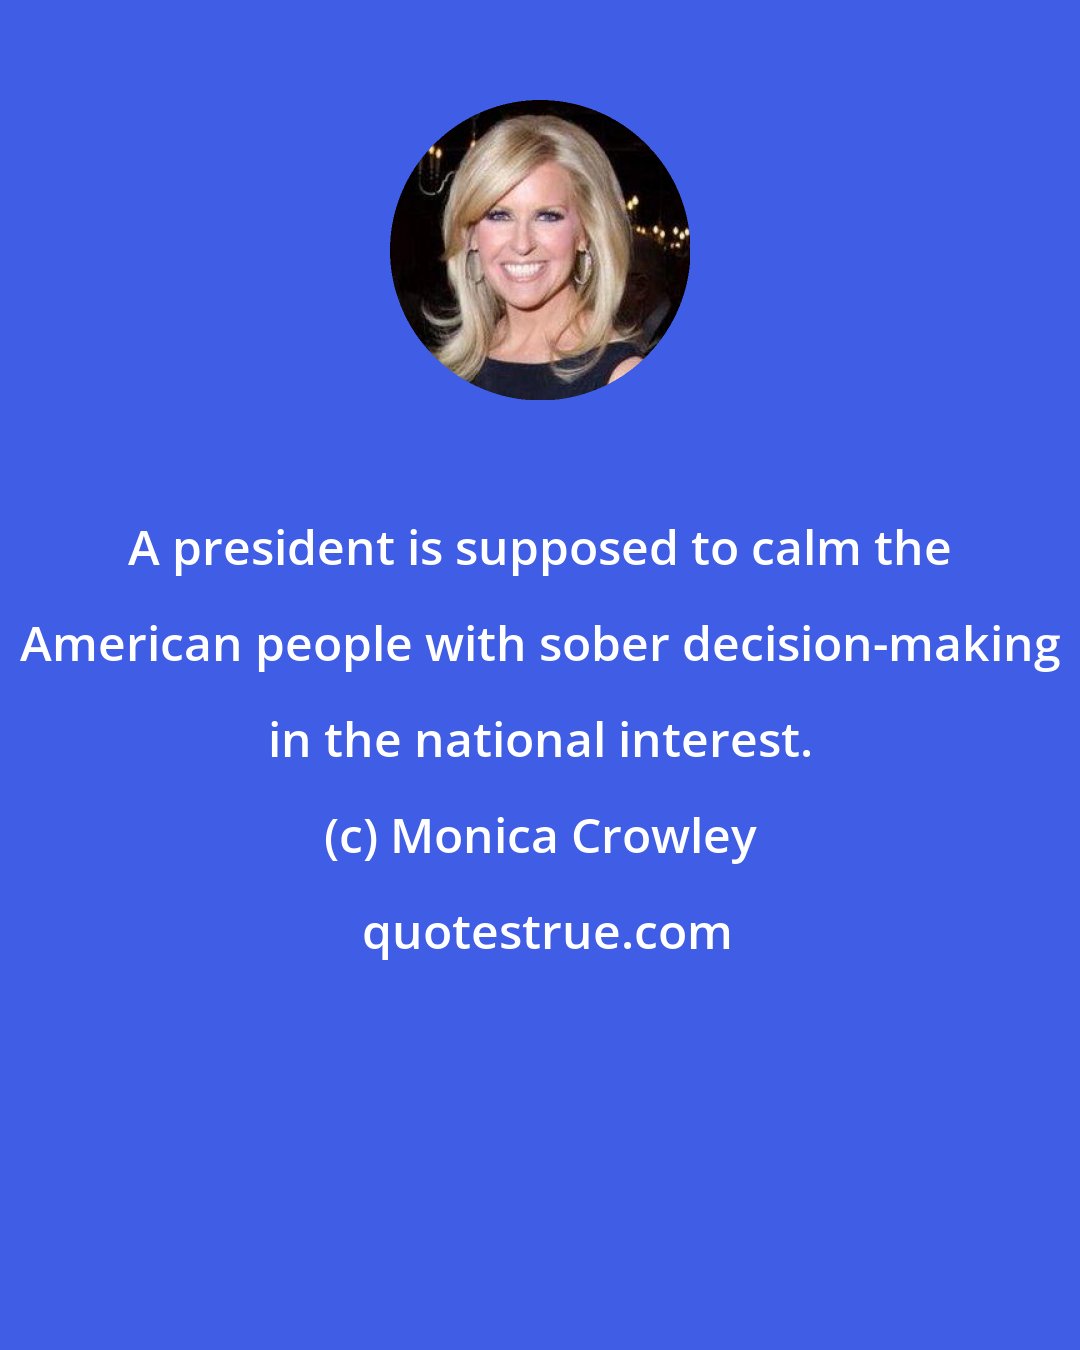 Monica Crowley: A president is supposed to calm the American people with sober decision-making in the national interest.